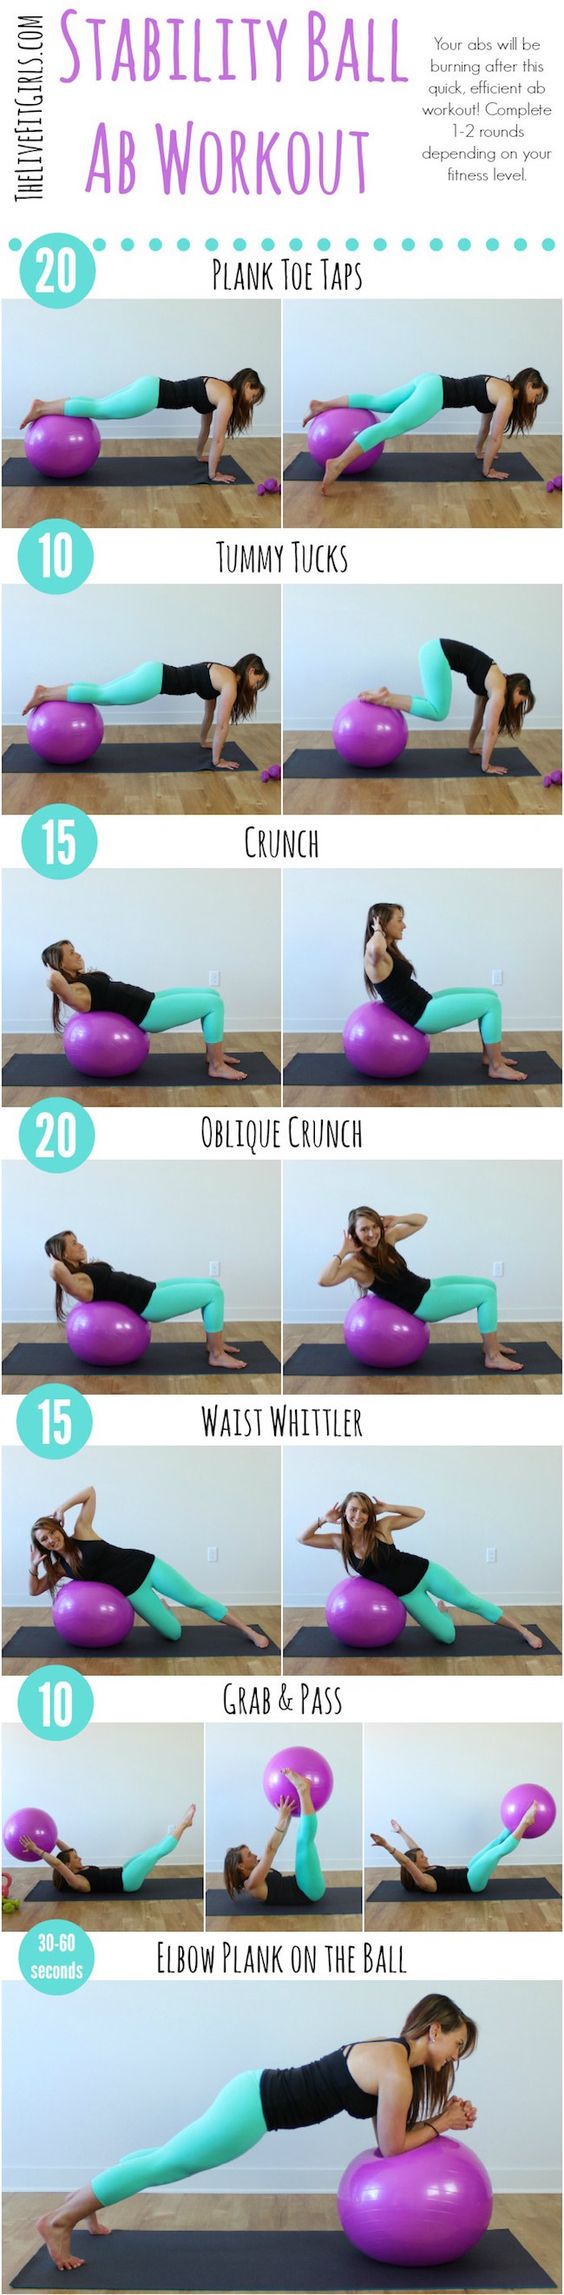 23 Intense Ab Workouts That Will Help You Shed Belly Fat Quickly! -  TrimmedandToned